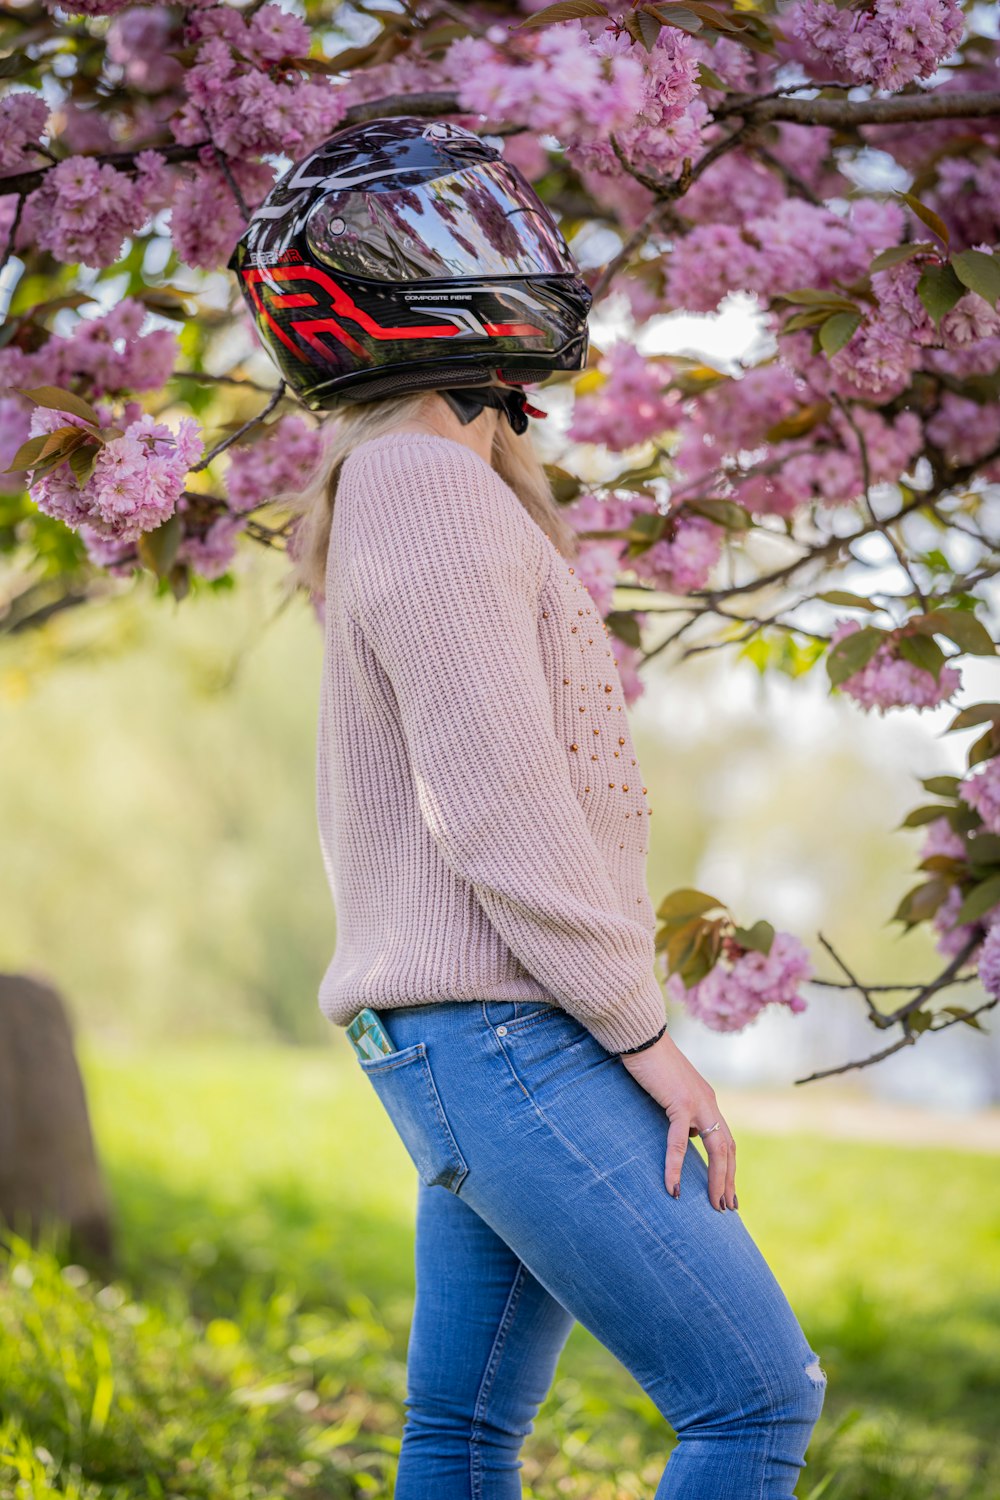 a person wearing a helmet